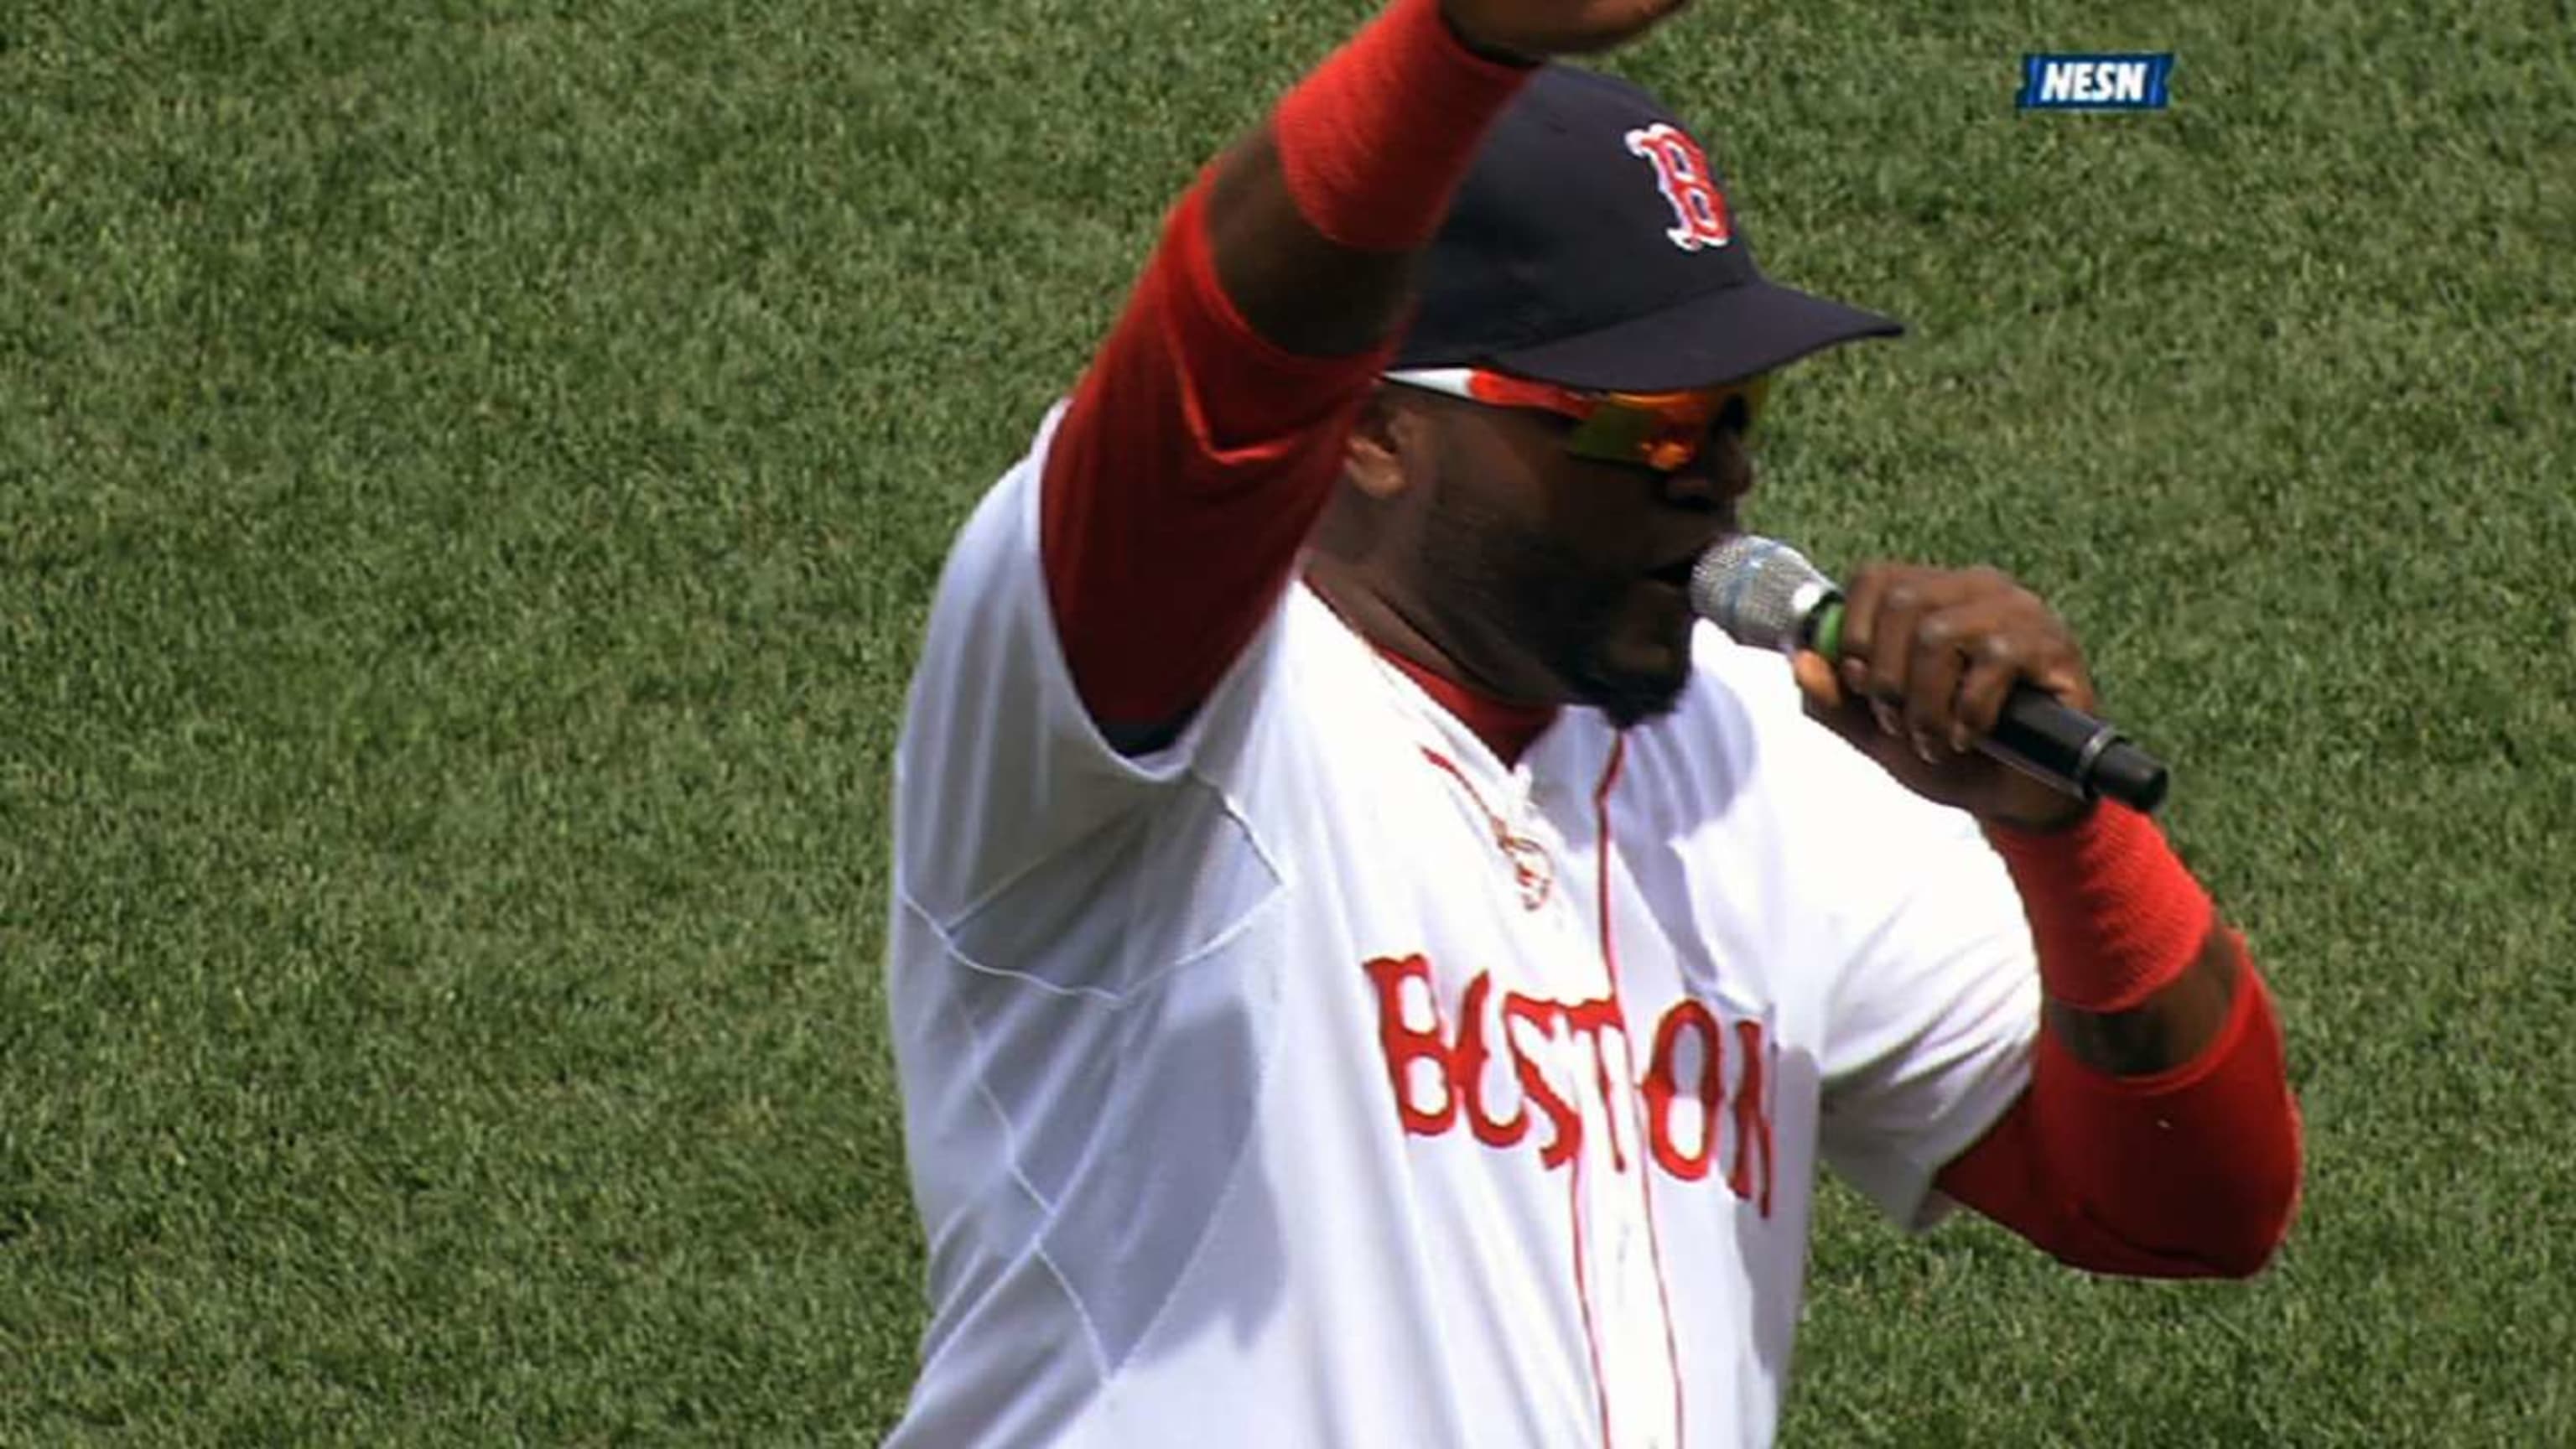 THIS DAY IN BÉISBOL May 14: David Ortiz is only 3rd player to reach 500 HR,  600 doubles - Latino Baseball